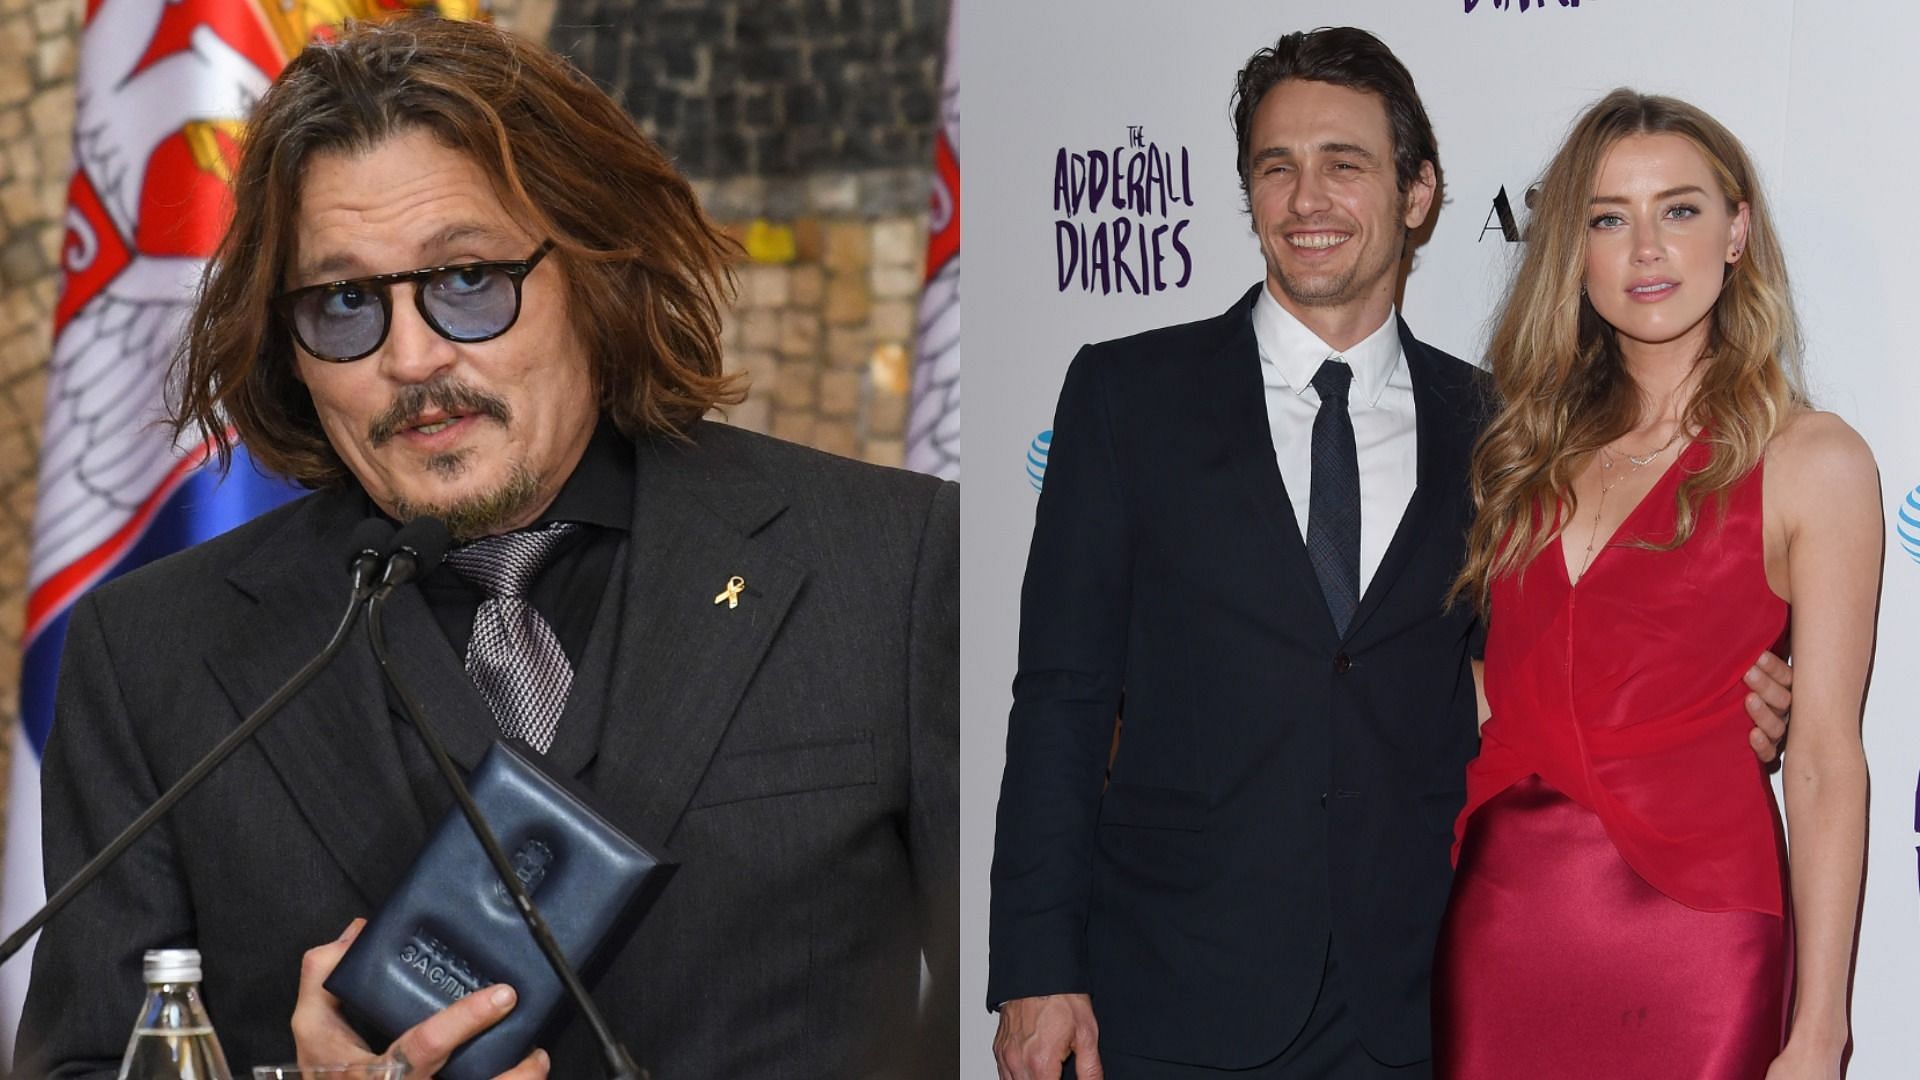 Amber Heard and James Franco were co-stars in The Adderall Diaries (Image via Getty Images/Axelle/Bauer-Griffin/Srdjan Stevanovic)